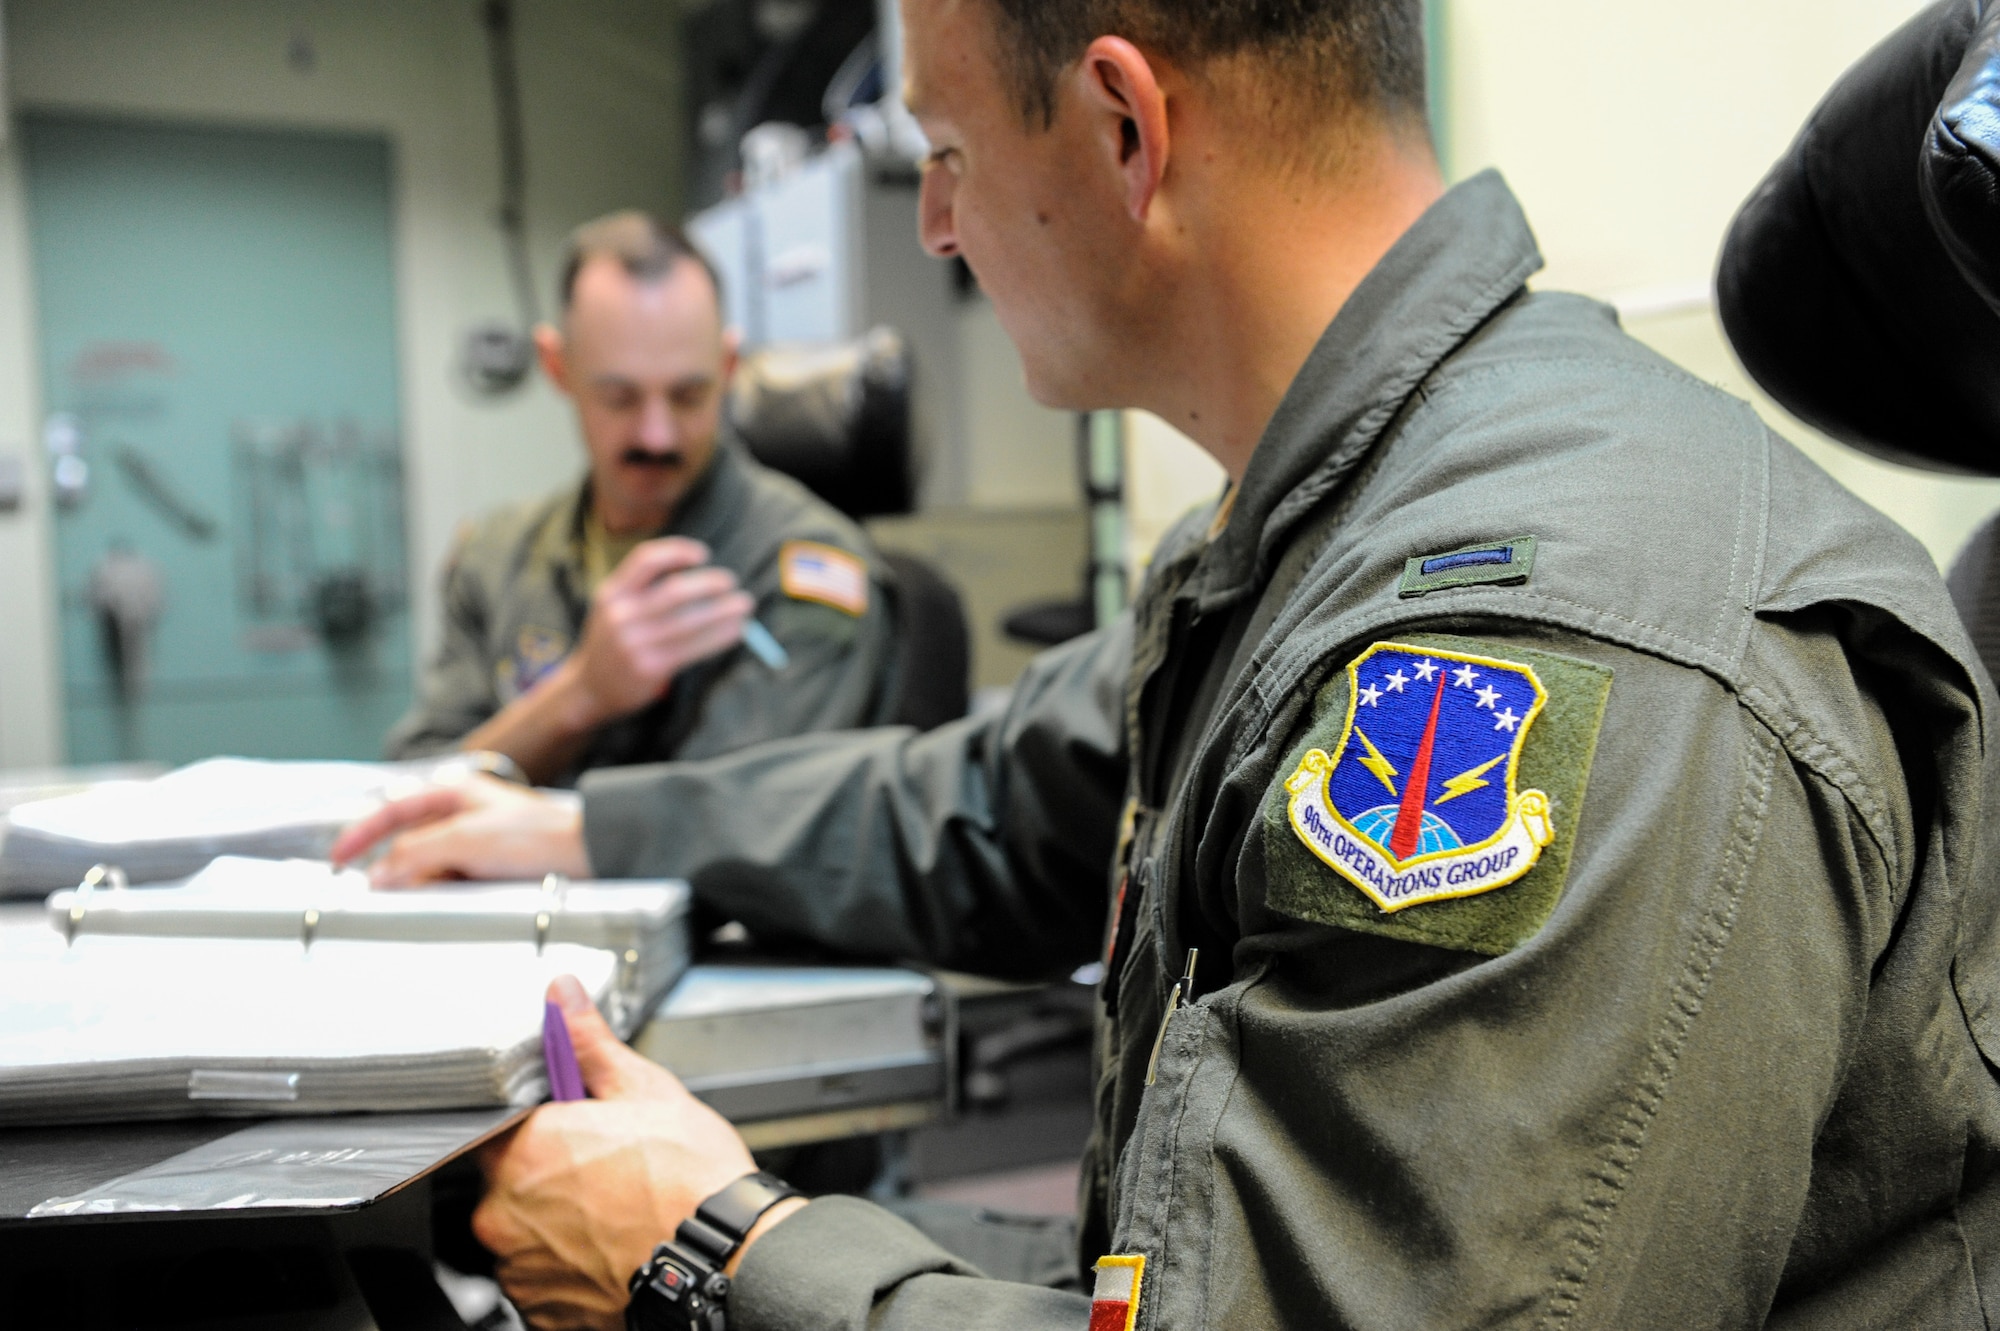 1st Lt. Austin Van Hoesen, 320th Missile Squadron assistant flight commander, reviews his checklist steps with 1st Lt. Jedediah Simpson, 320 MS missileer, on F.E. Warren Air Force Base, Wyoming, April 25, 2019. The Air Force Association awarded Van Hoesen and Simpson the 2019 Gen. Thomas S. Power Outstanding Missile Crew Award. (U.S. Air Force photo by Joseph Coslett)